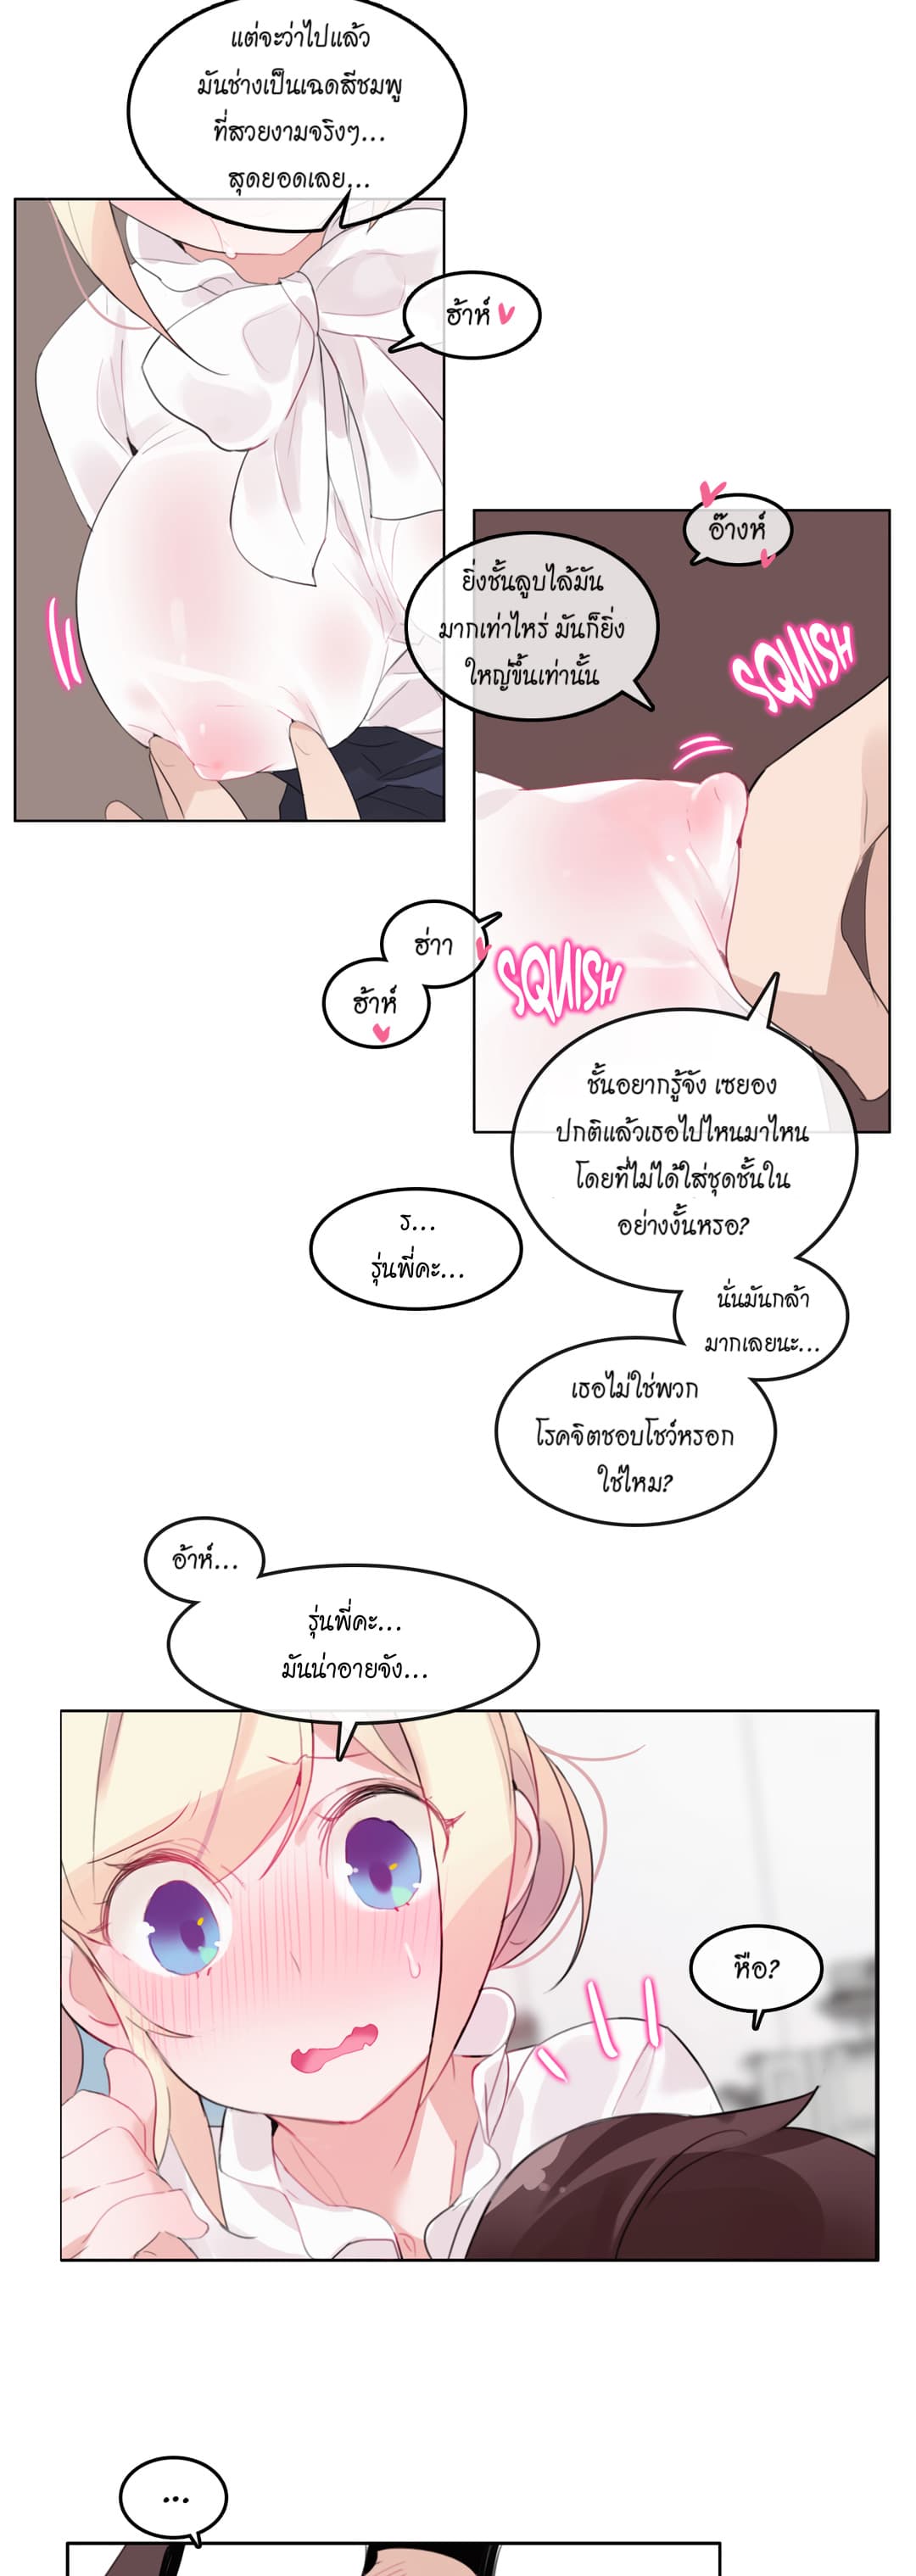 A Pervert’s Daily Life 24 (8)